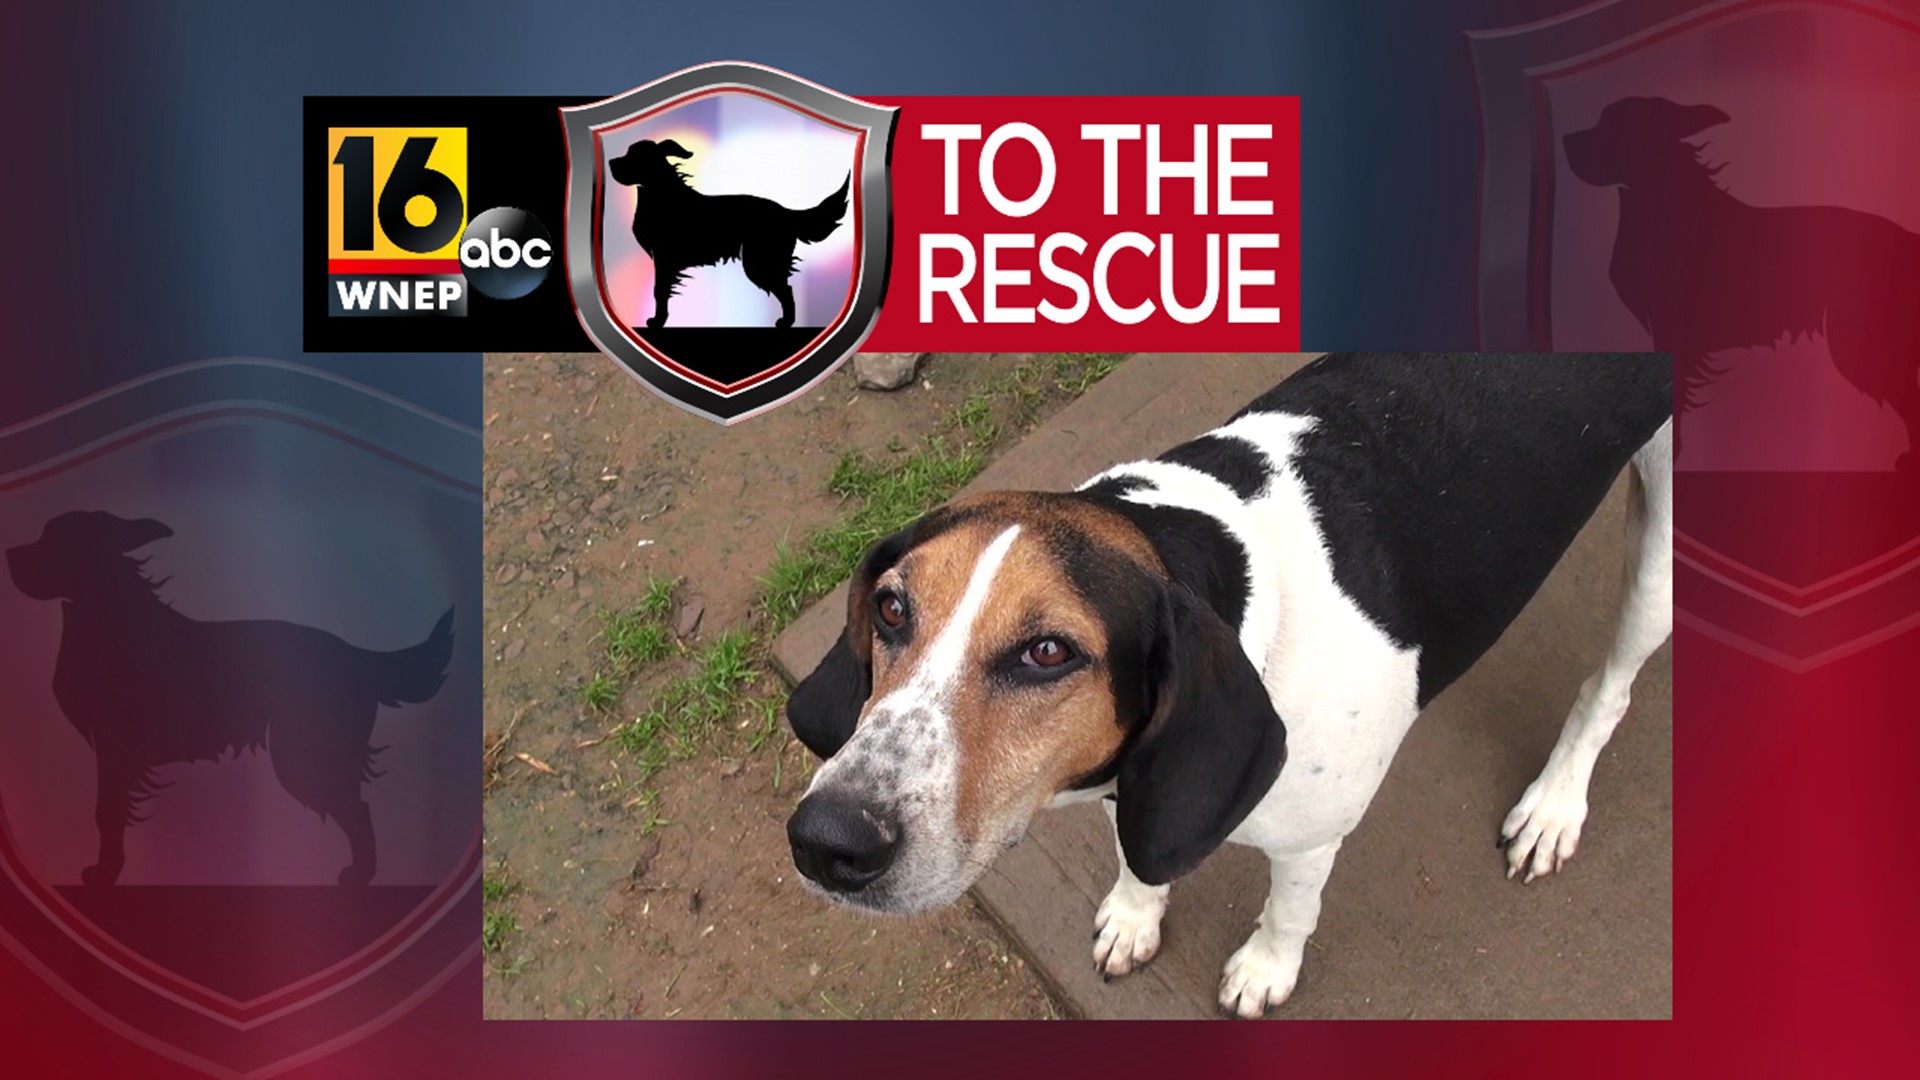 In this week's 16 To The Rescue, we meet Oso, a 4-year-old hound who is looking for the right home, a place where she can truly be herself.